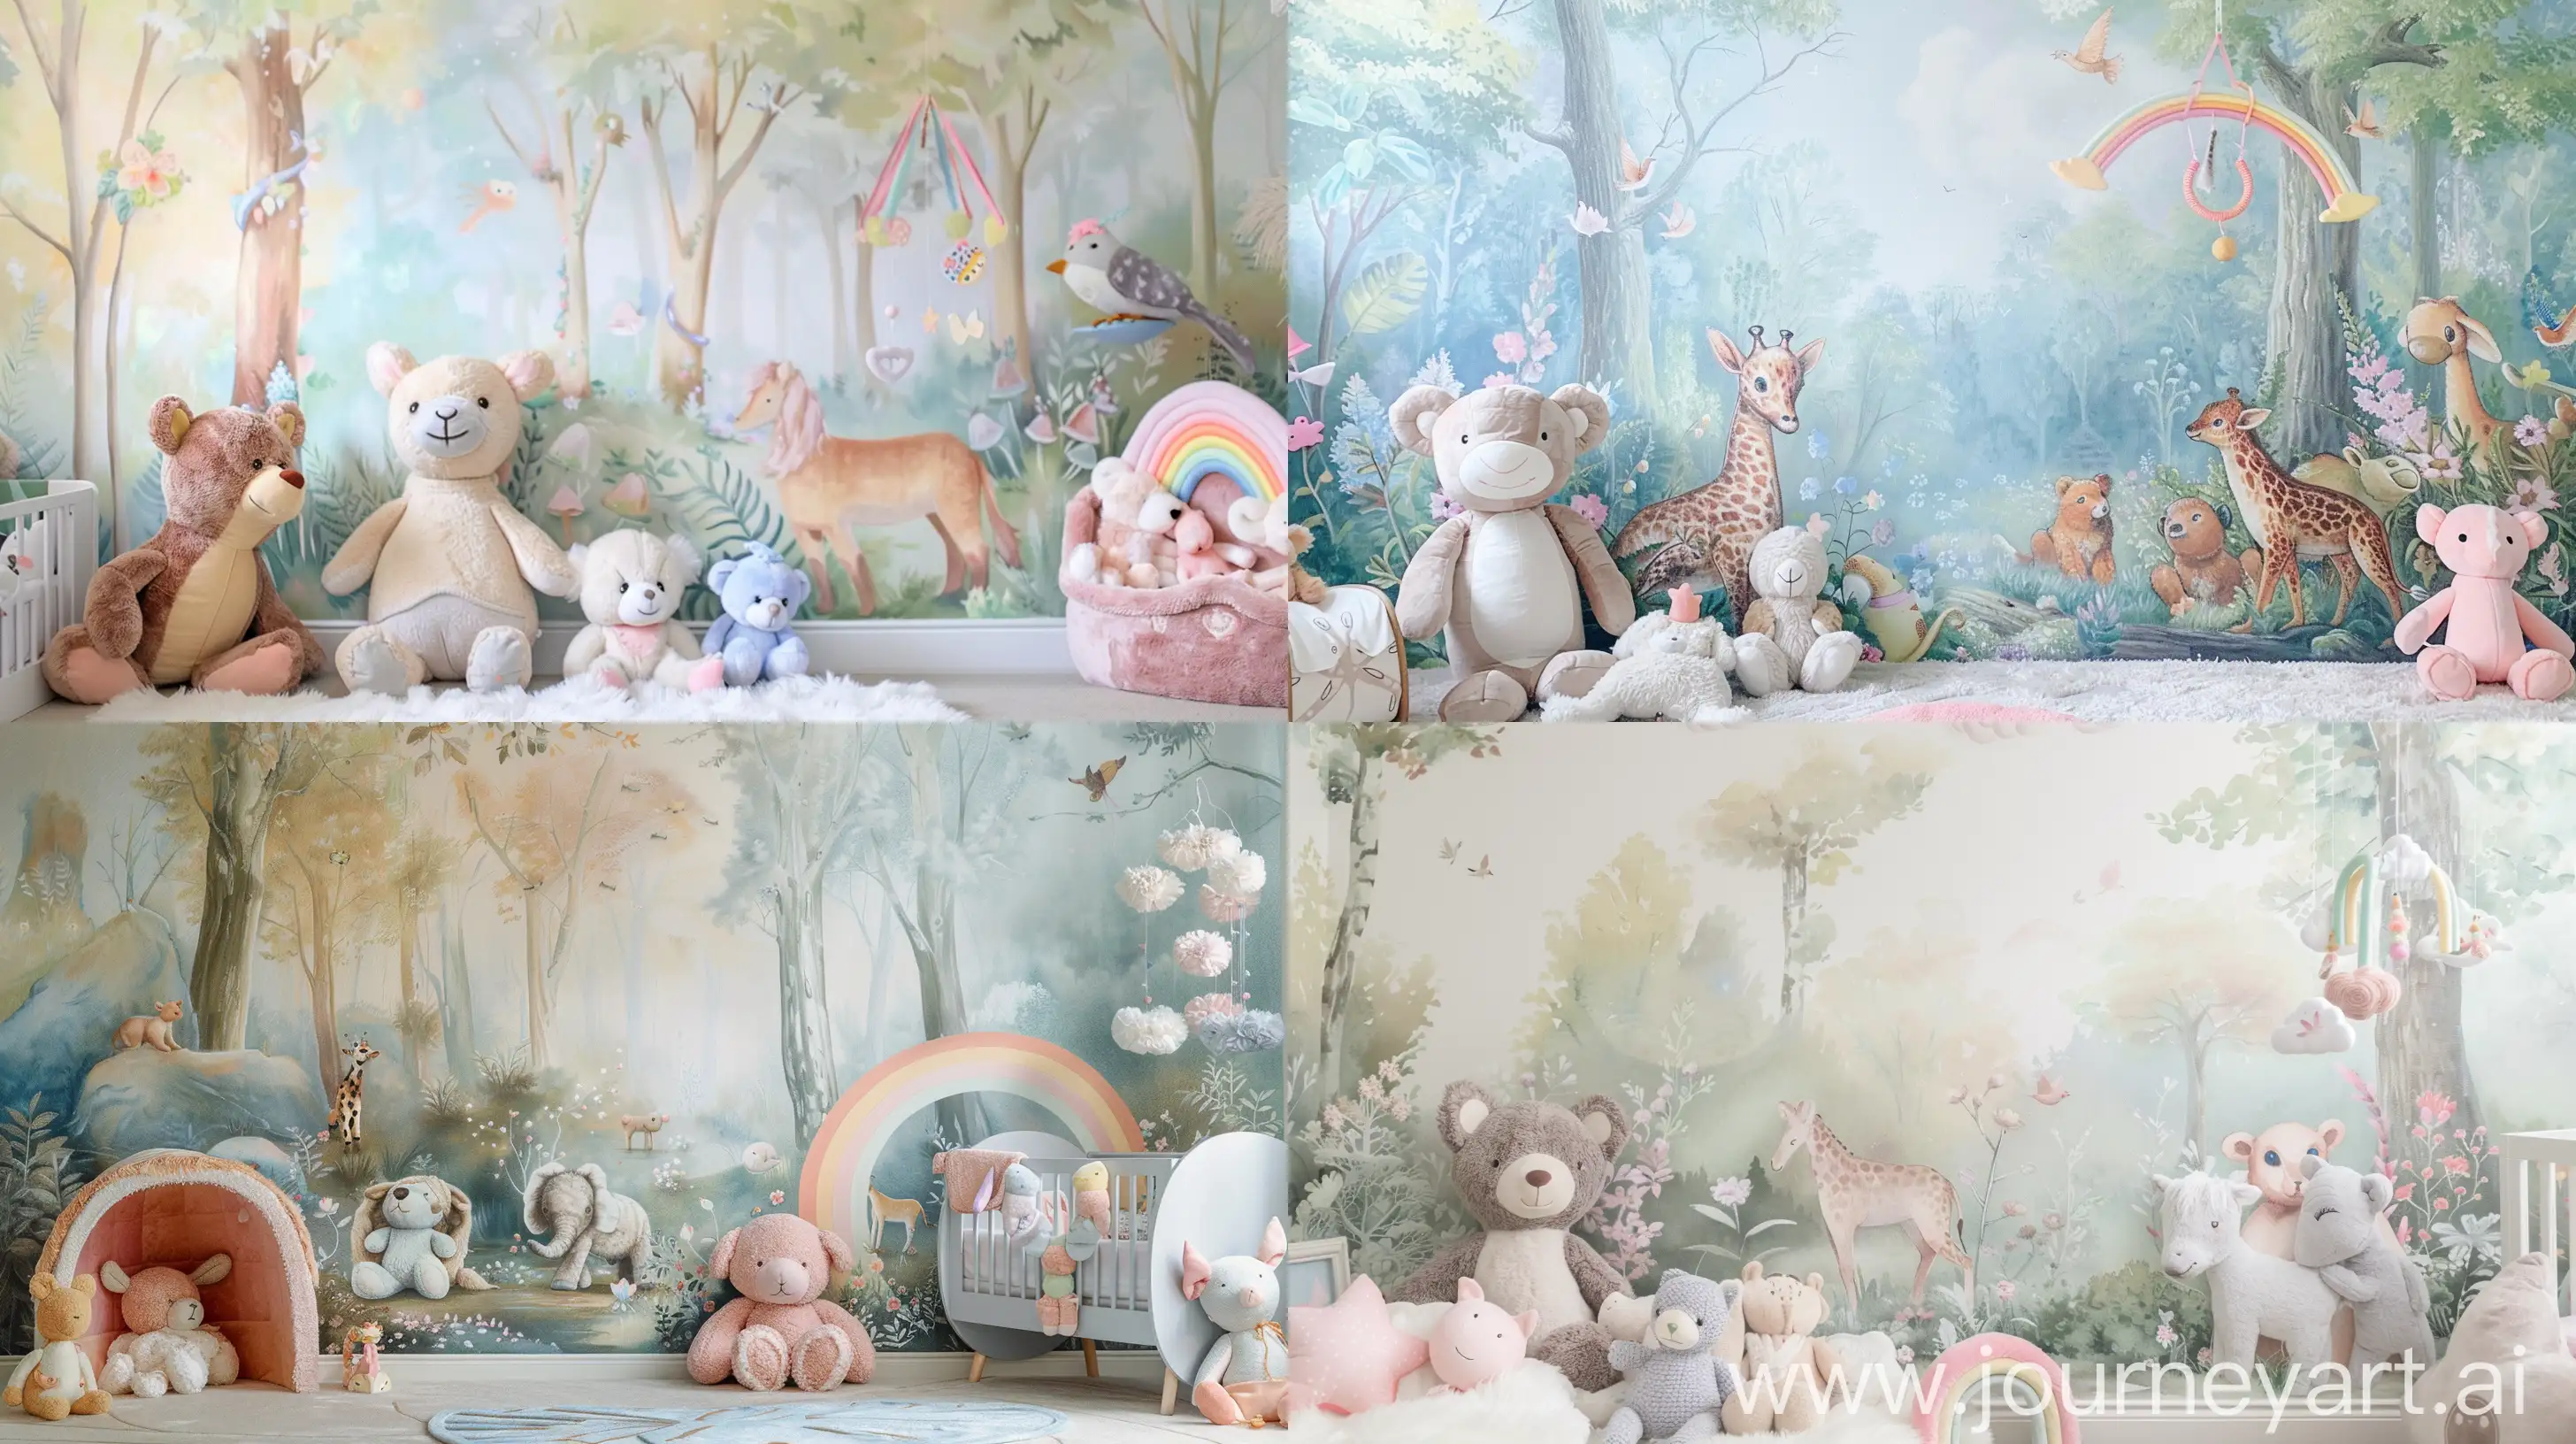 Whimsical Wonderland: Nursery Room with Hand-Painted Mural of Enchanted Forest, Oversized Plush Animals, and Pastel Rainbow Mobile. --ar 16:9